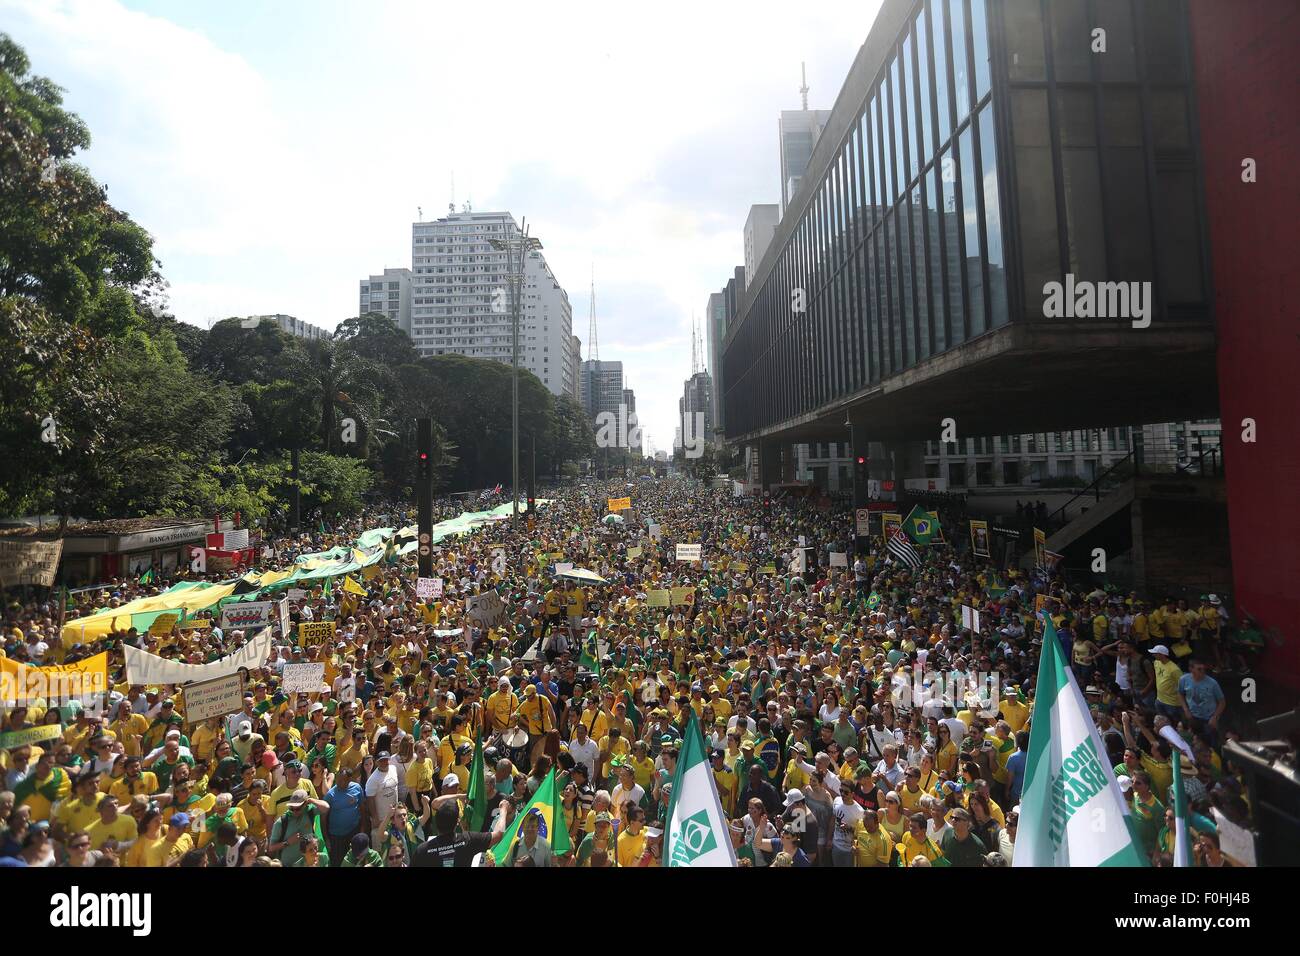 Sao Paulo, Brazil. 16th Aug, 2015. Demonstrators take part in a protest against the corruption scandal in Petrobras and demand for the impeachment of Brazil's President Dilma Rousseff, in Sao Paulo, Brazil, on Aug. 16, 2015. According to local press, the anti-government protests were carried out at least in 200 cities around the country. © Rahel Patrasso/Xinhua/Alamy Live News Stock Photo